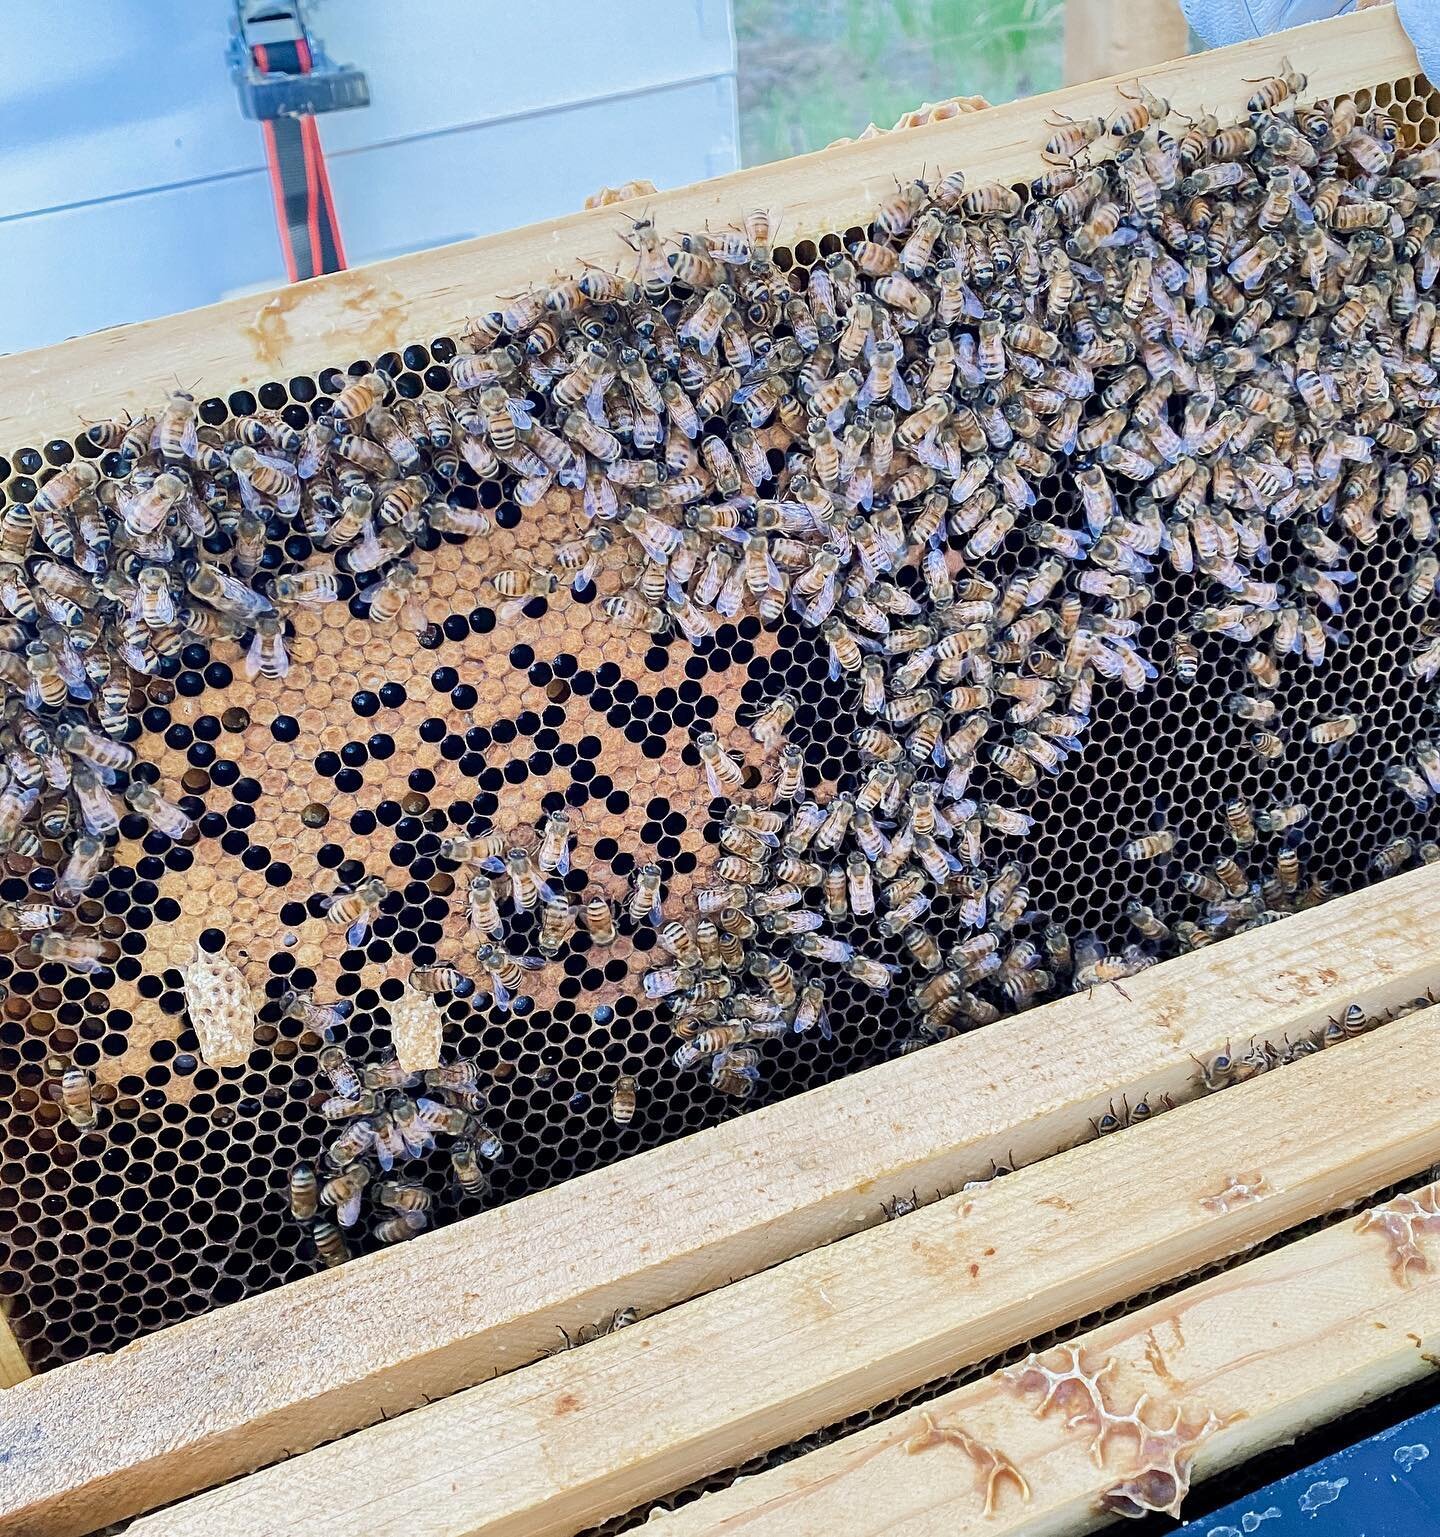 We found a couple of queen cells at our last hive check!
&bull;
&bull;
&bull;
#beekeeping #beekeepers #bees #honeybees #lavenderfarm #discover #sidehustle #physicianassistantowned #healthcare #optoutdoors #nature #coloradobeekeeping #supportsmallbusi